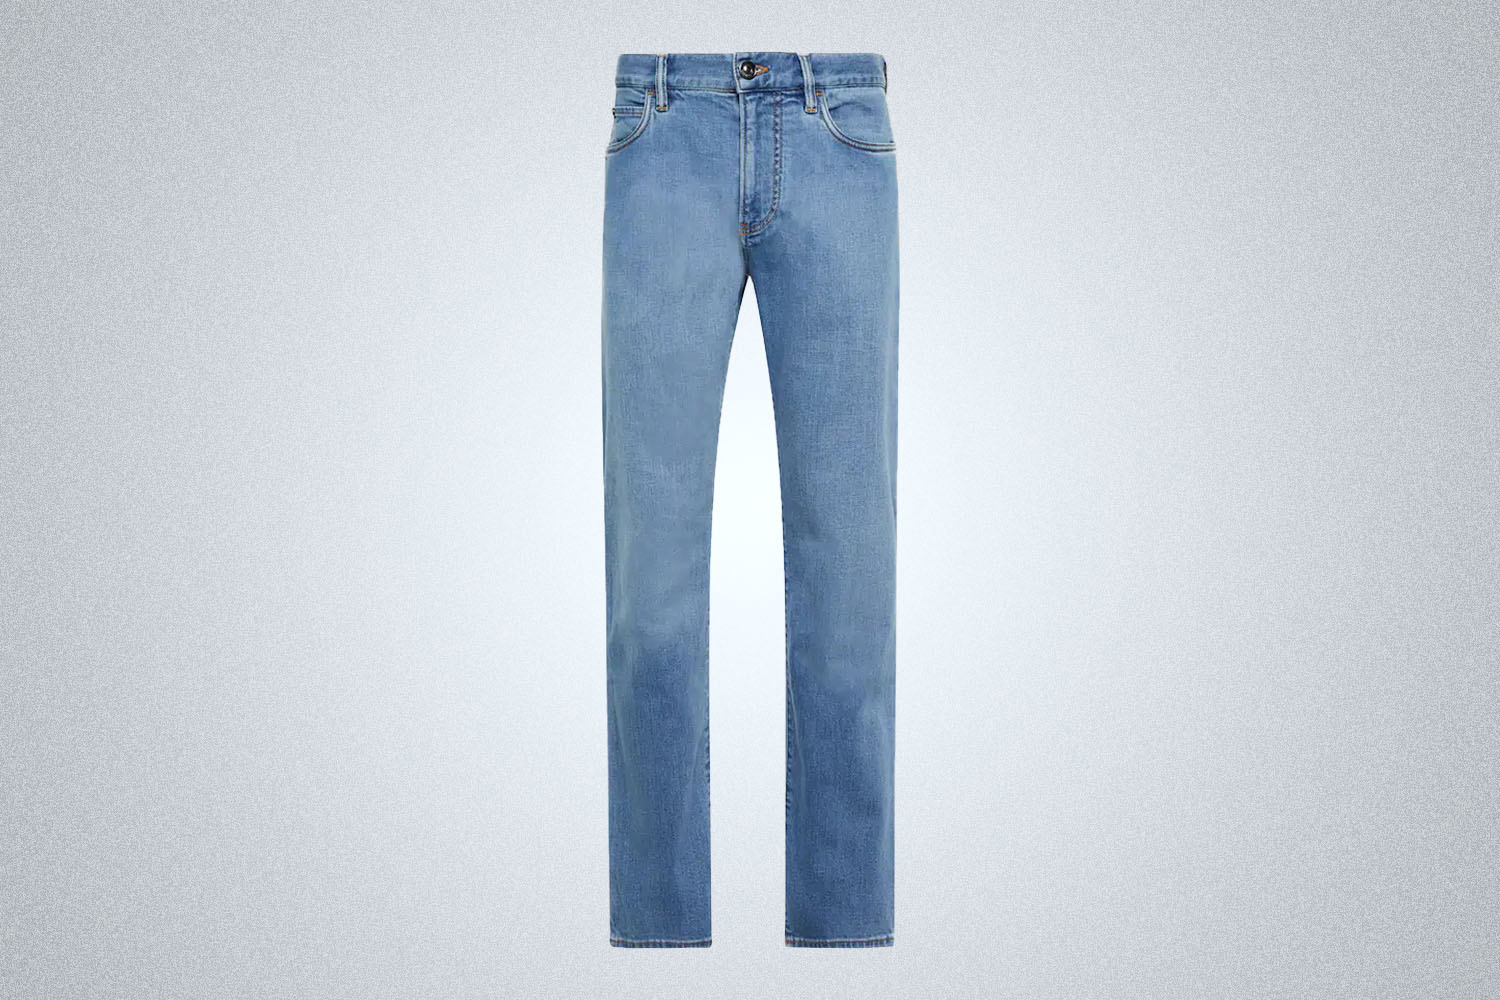 a pair of Loro Piana jeans on a grey background